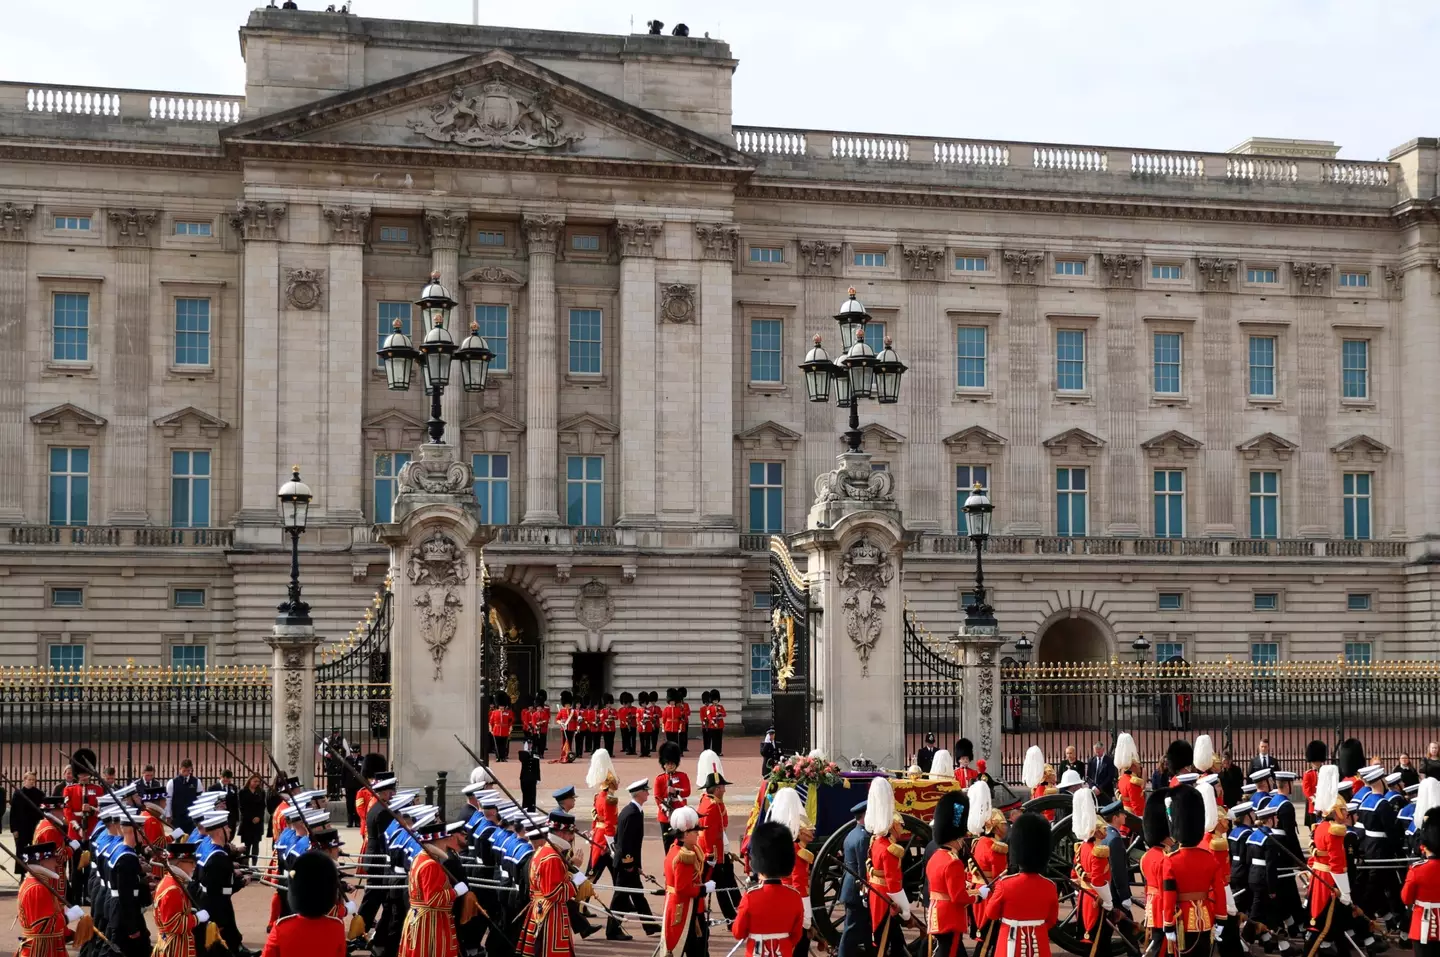 The Queen's funeral procession passing Buckingham Palace.